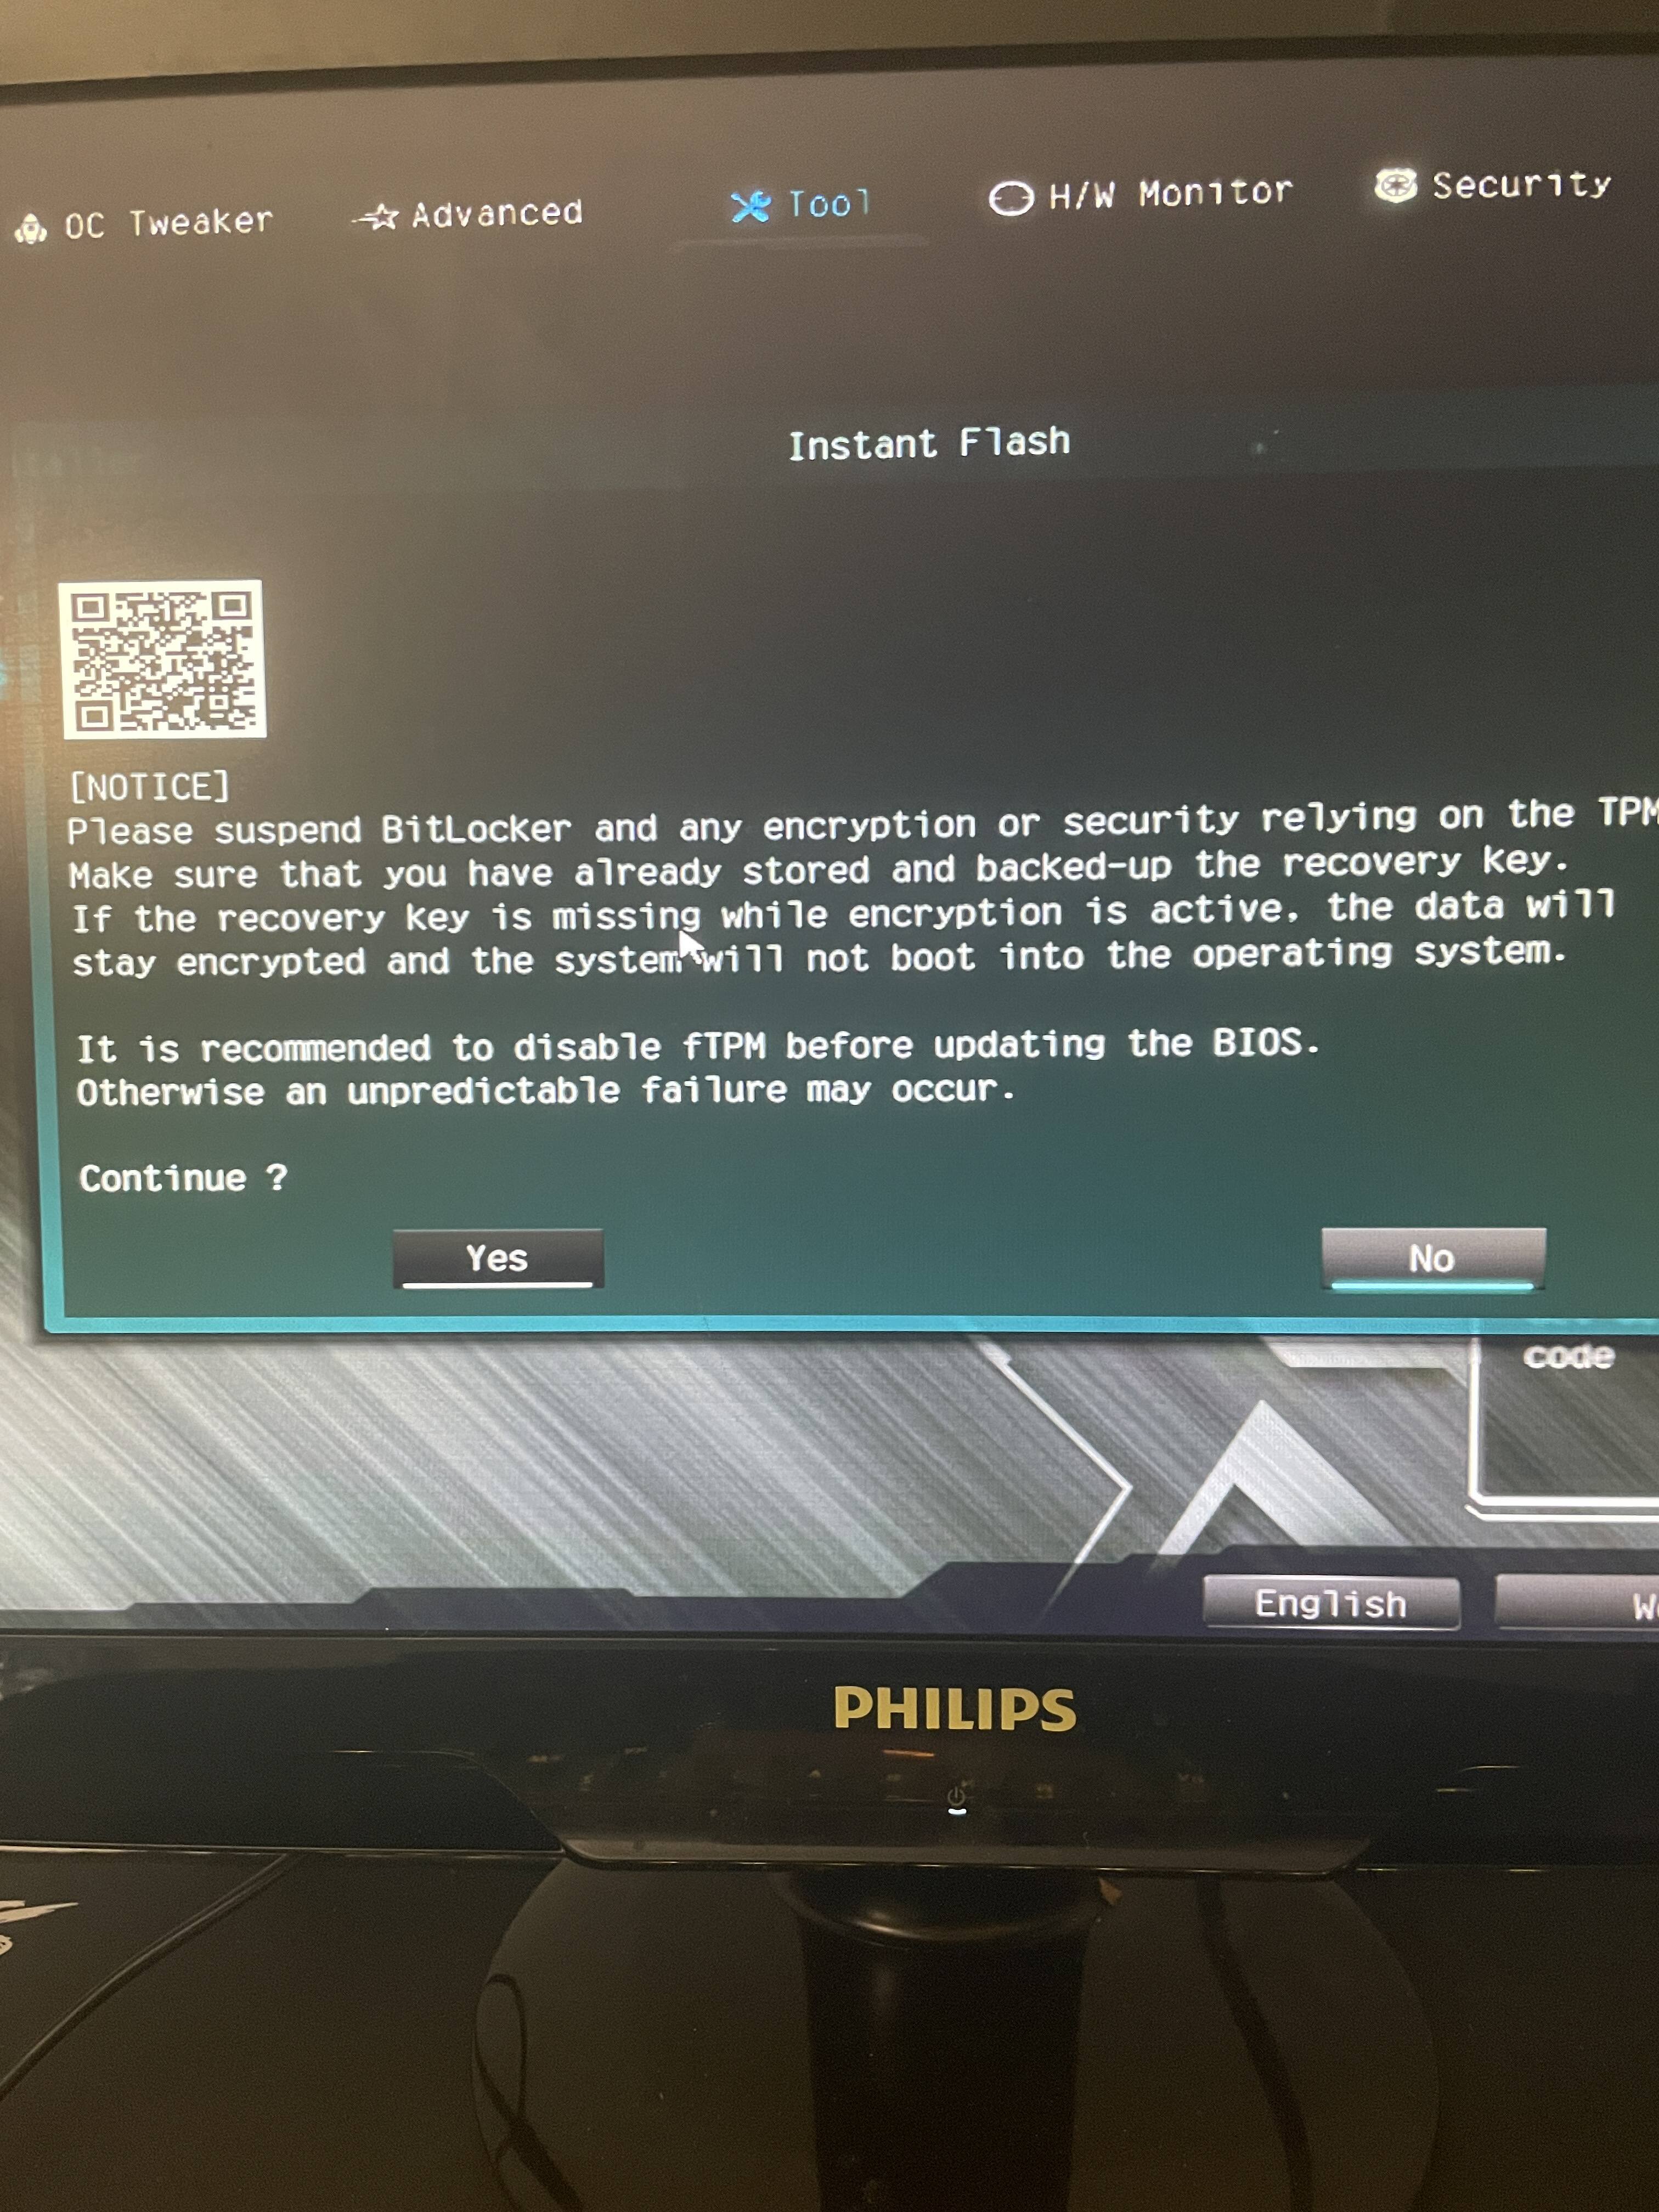 Help With New Build - Bios Settings - Troubleshooting - Linus Tech Tips